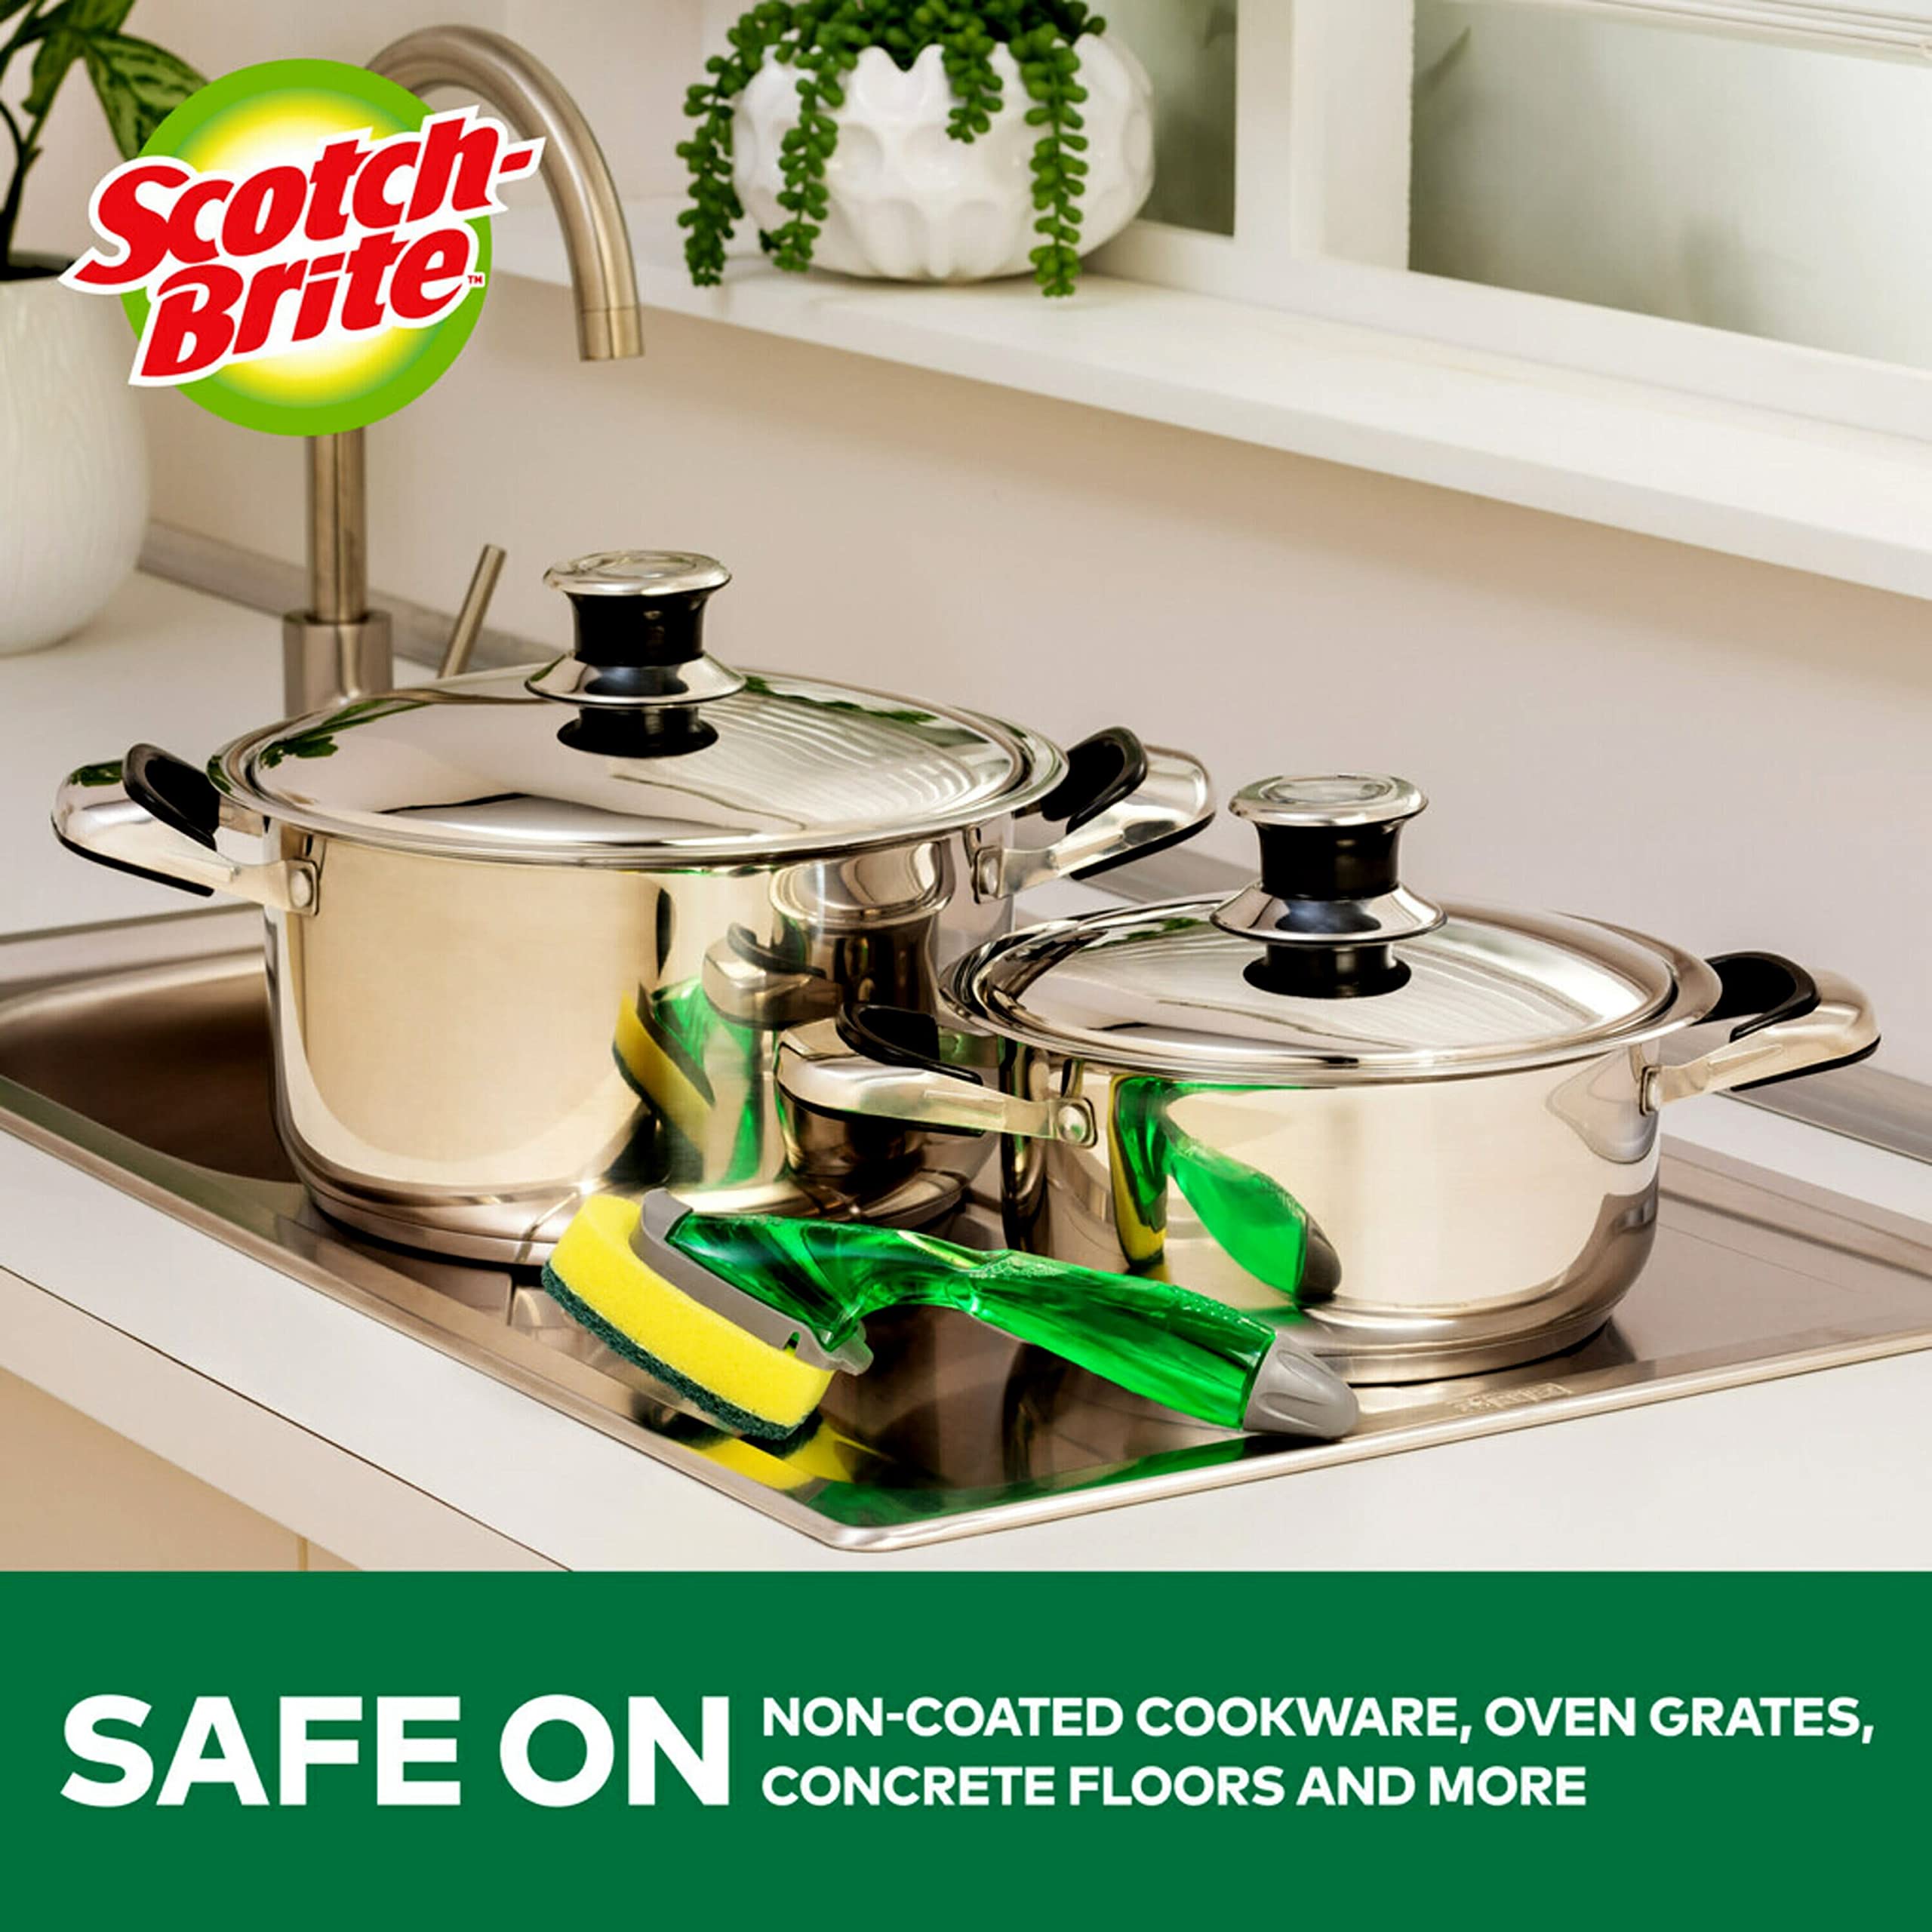 Scotch-Brite Heavy Duty Dishwand Kit, Includes 1 Wand & 7 Refill Pads, Keep Hands Out of the Mess